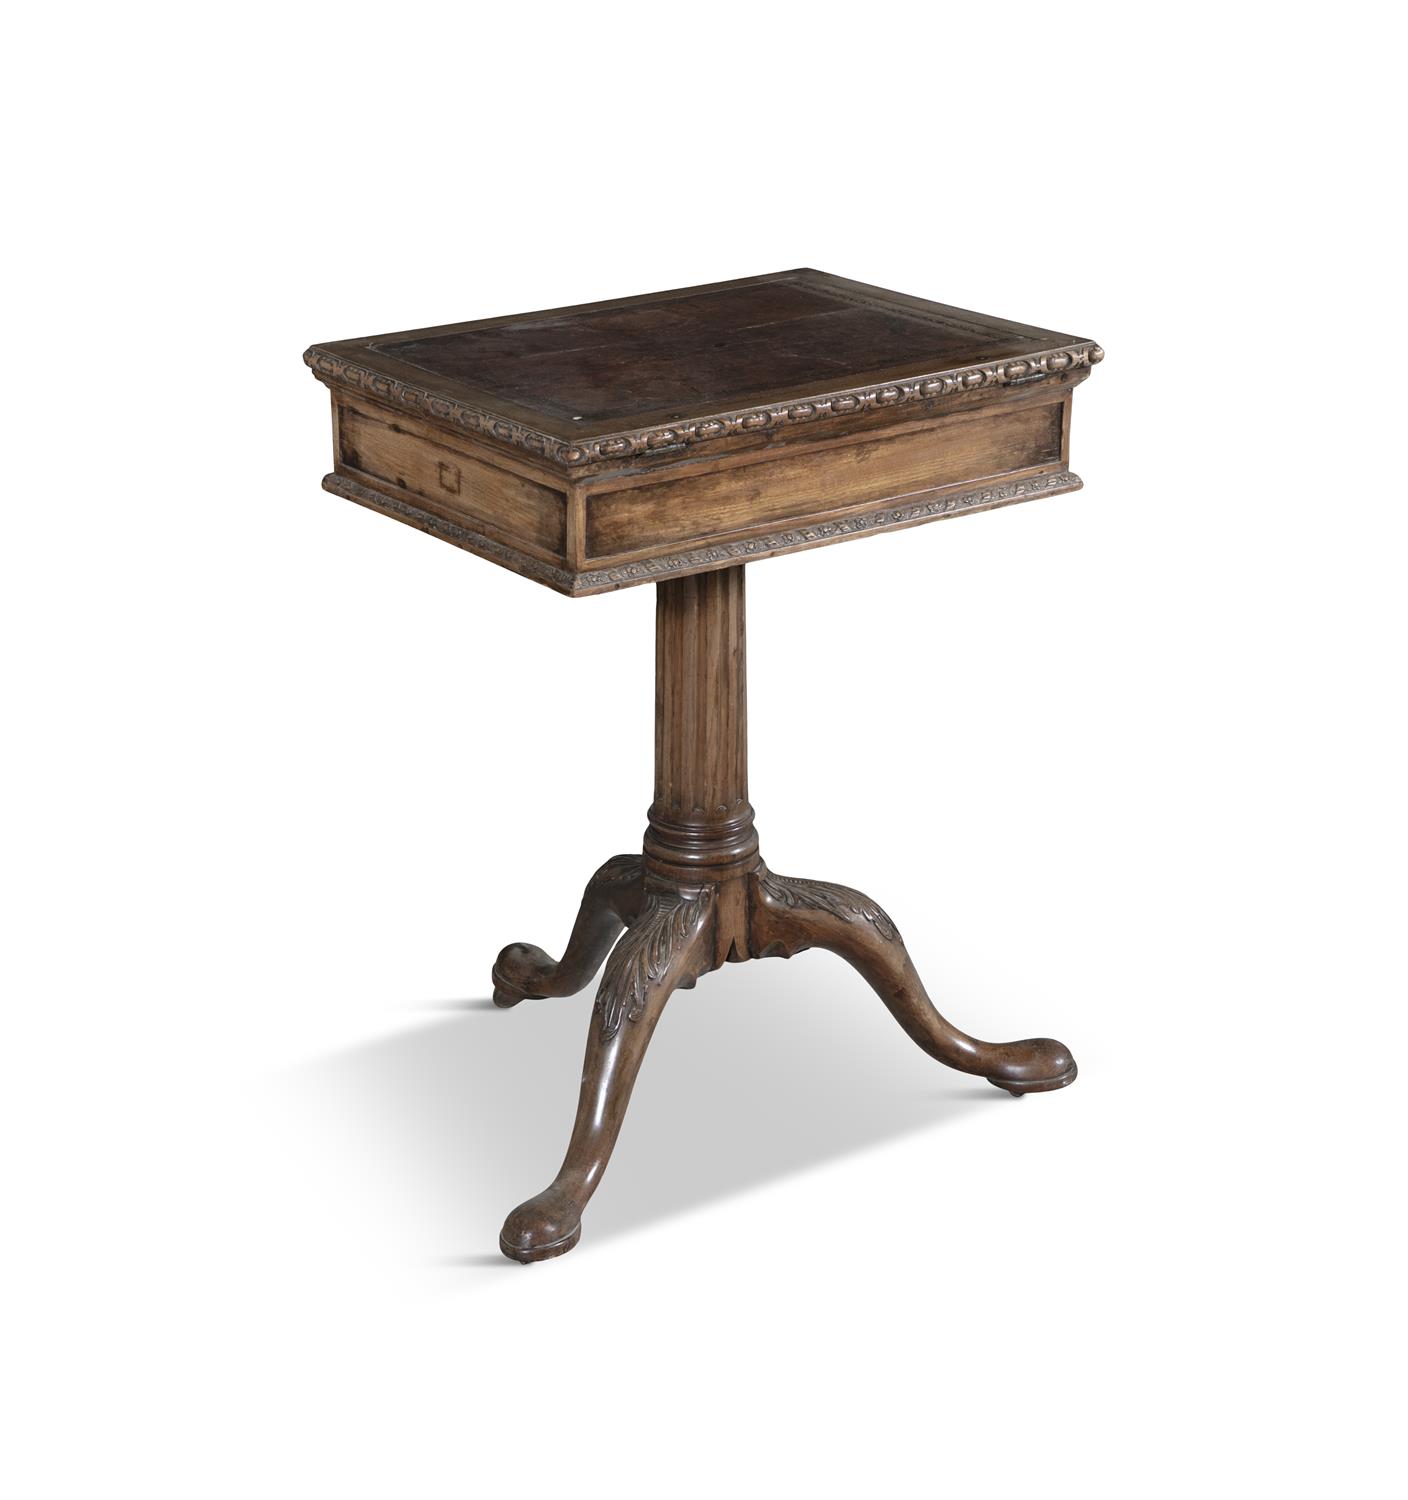 A GEORGE III MAHOGANY WRITING TABLE, MID 18TH CENTURY, the rectangular top with leather inset - Image 2 of 4